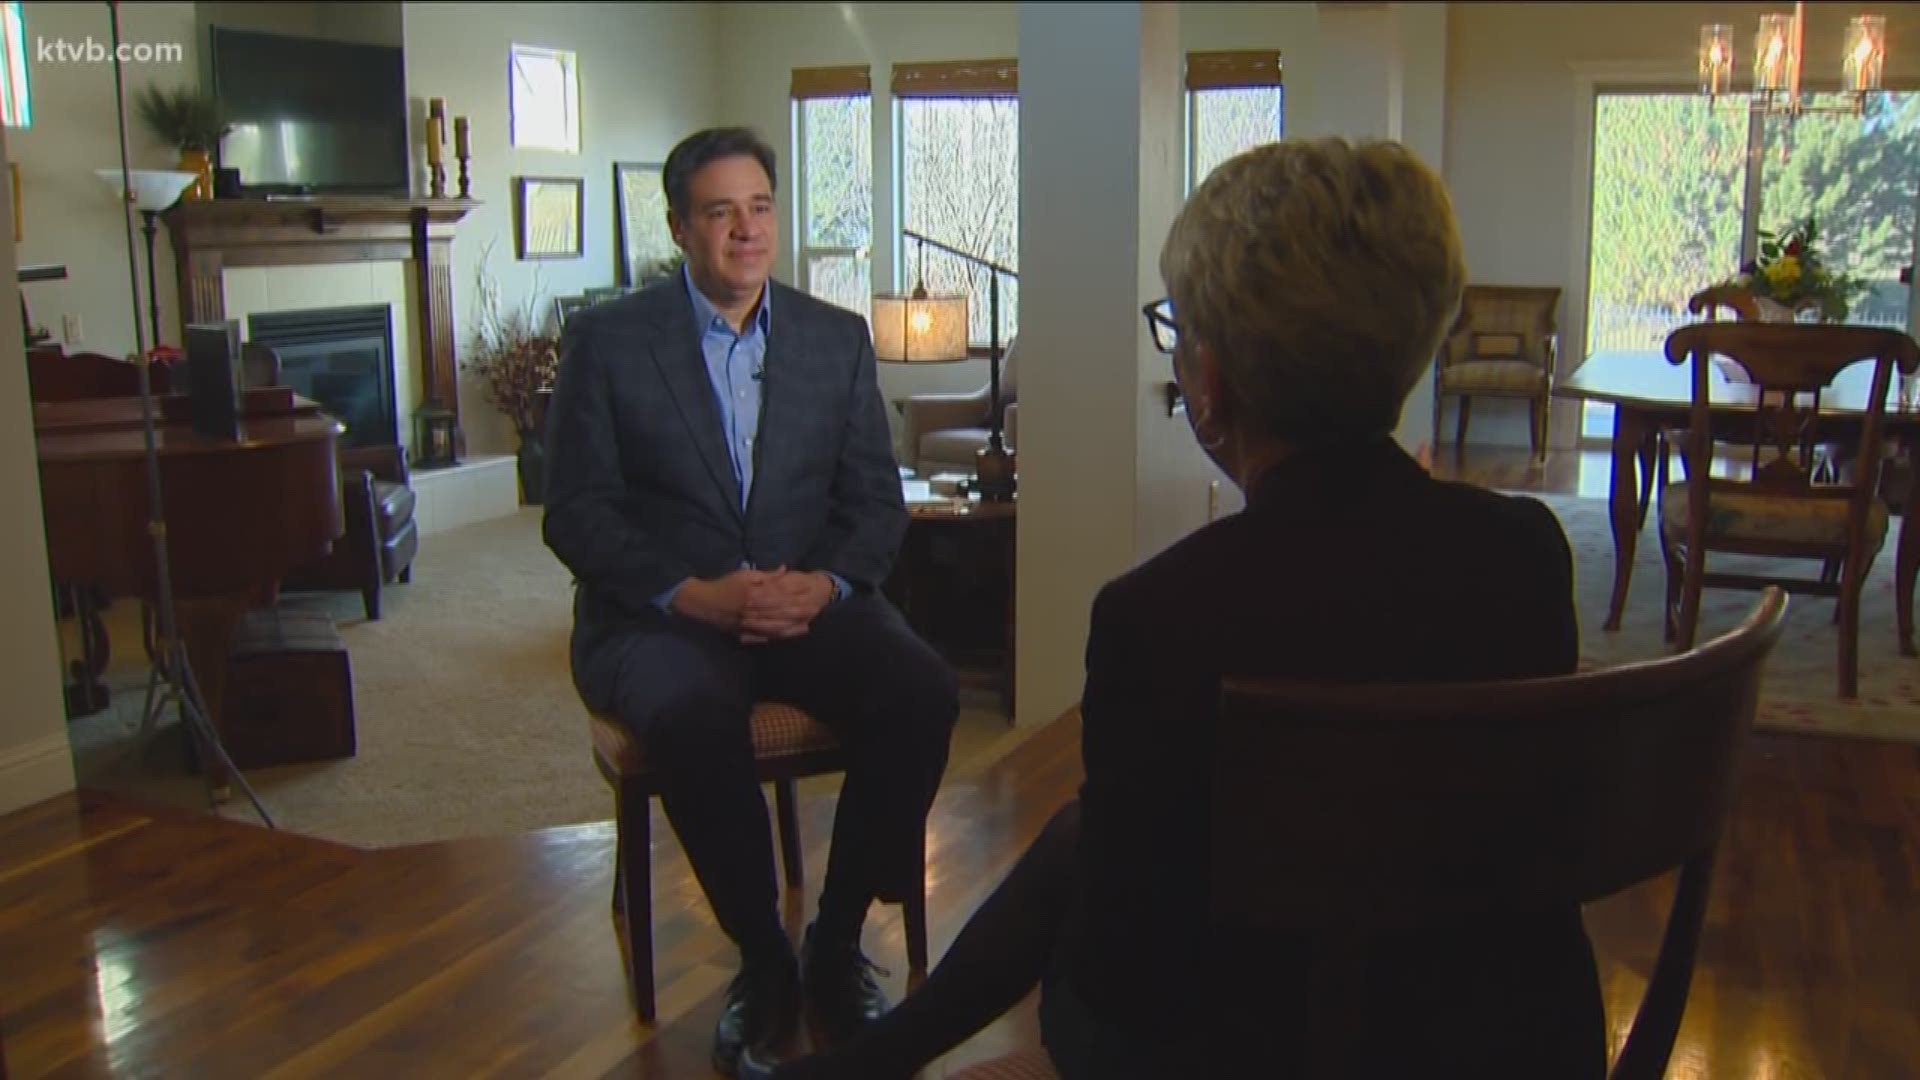 After seven years as congressman in Idaho's 1st District, Republican gubernatorial candidate Raul Labrador says now is the time to settle back into life in Idaho and a new opportunity to serve.